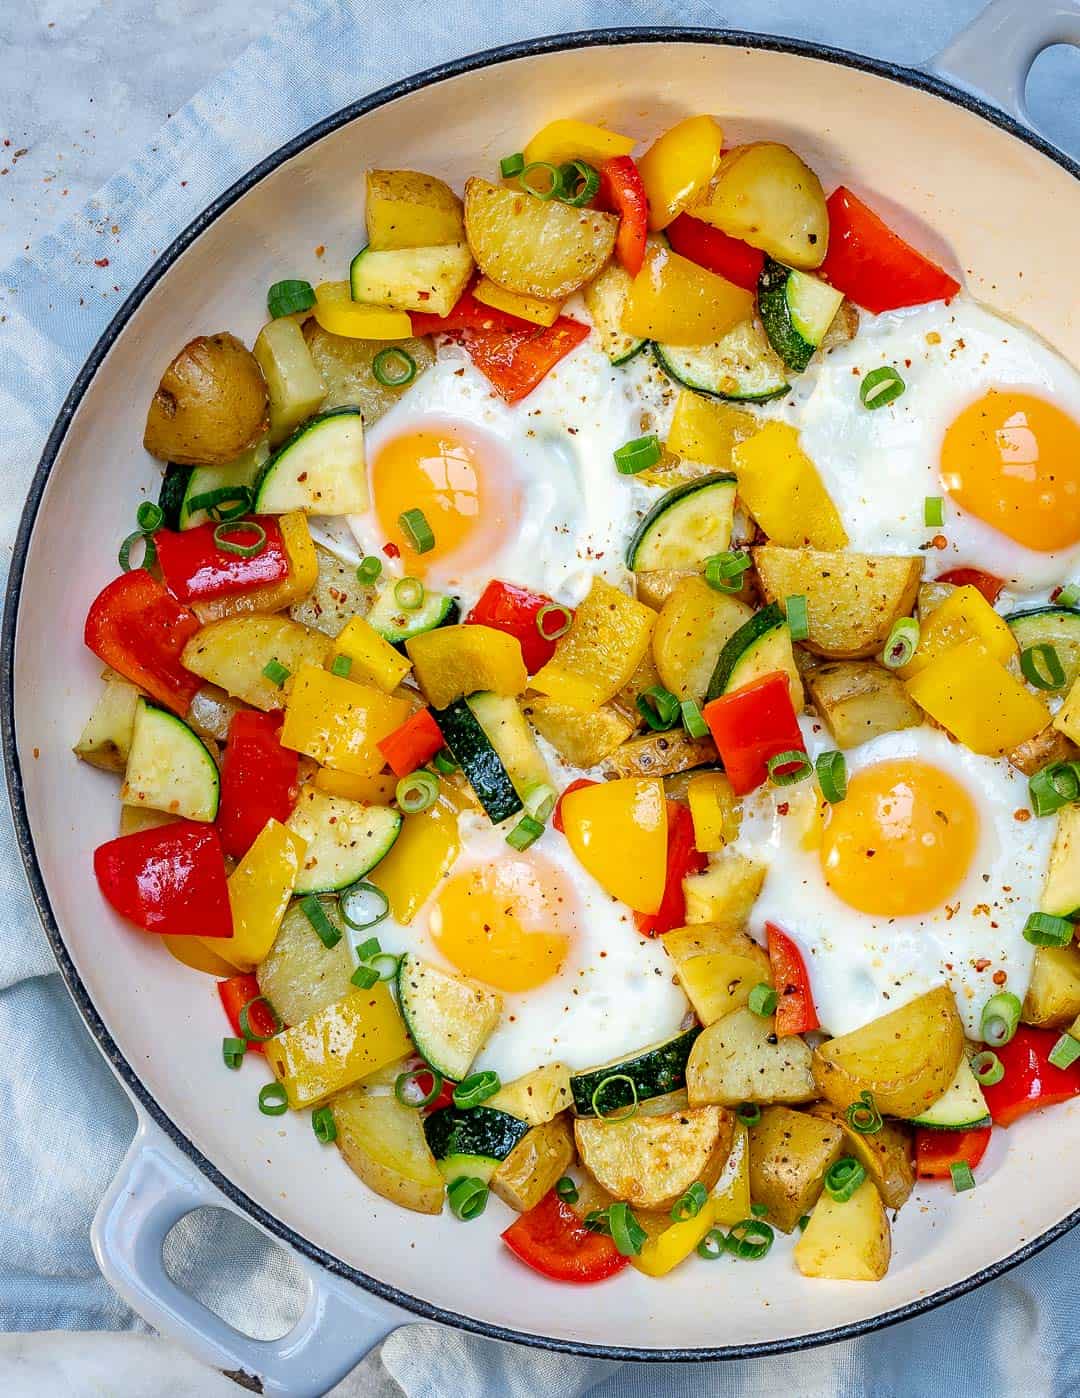 Easy One Pan Egg And Veggie Breakfast Recipe Healthy Fitness Meals